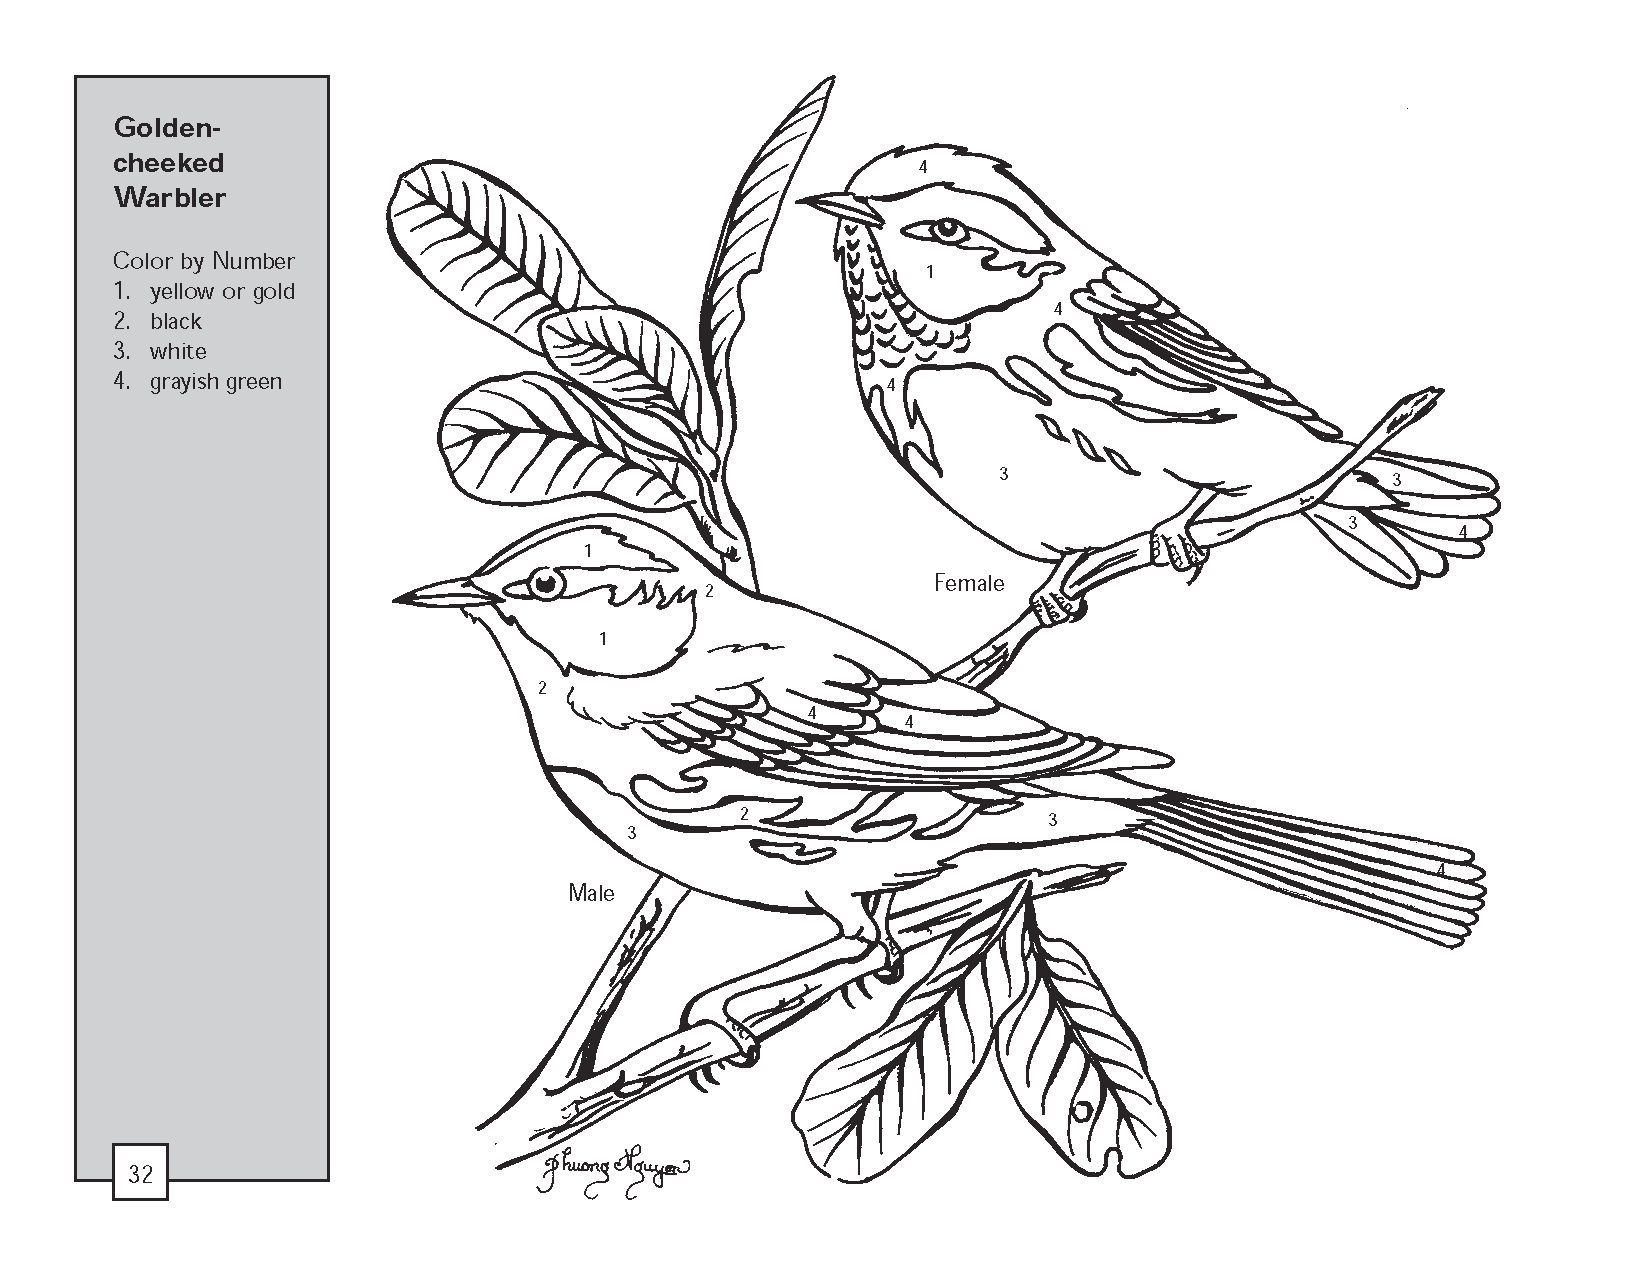 White-eared Warbler coloring #2, Download drawings